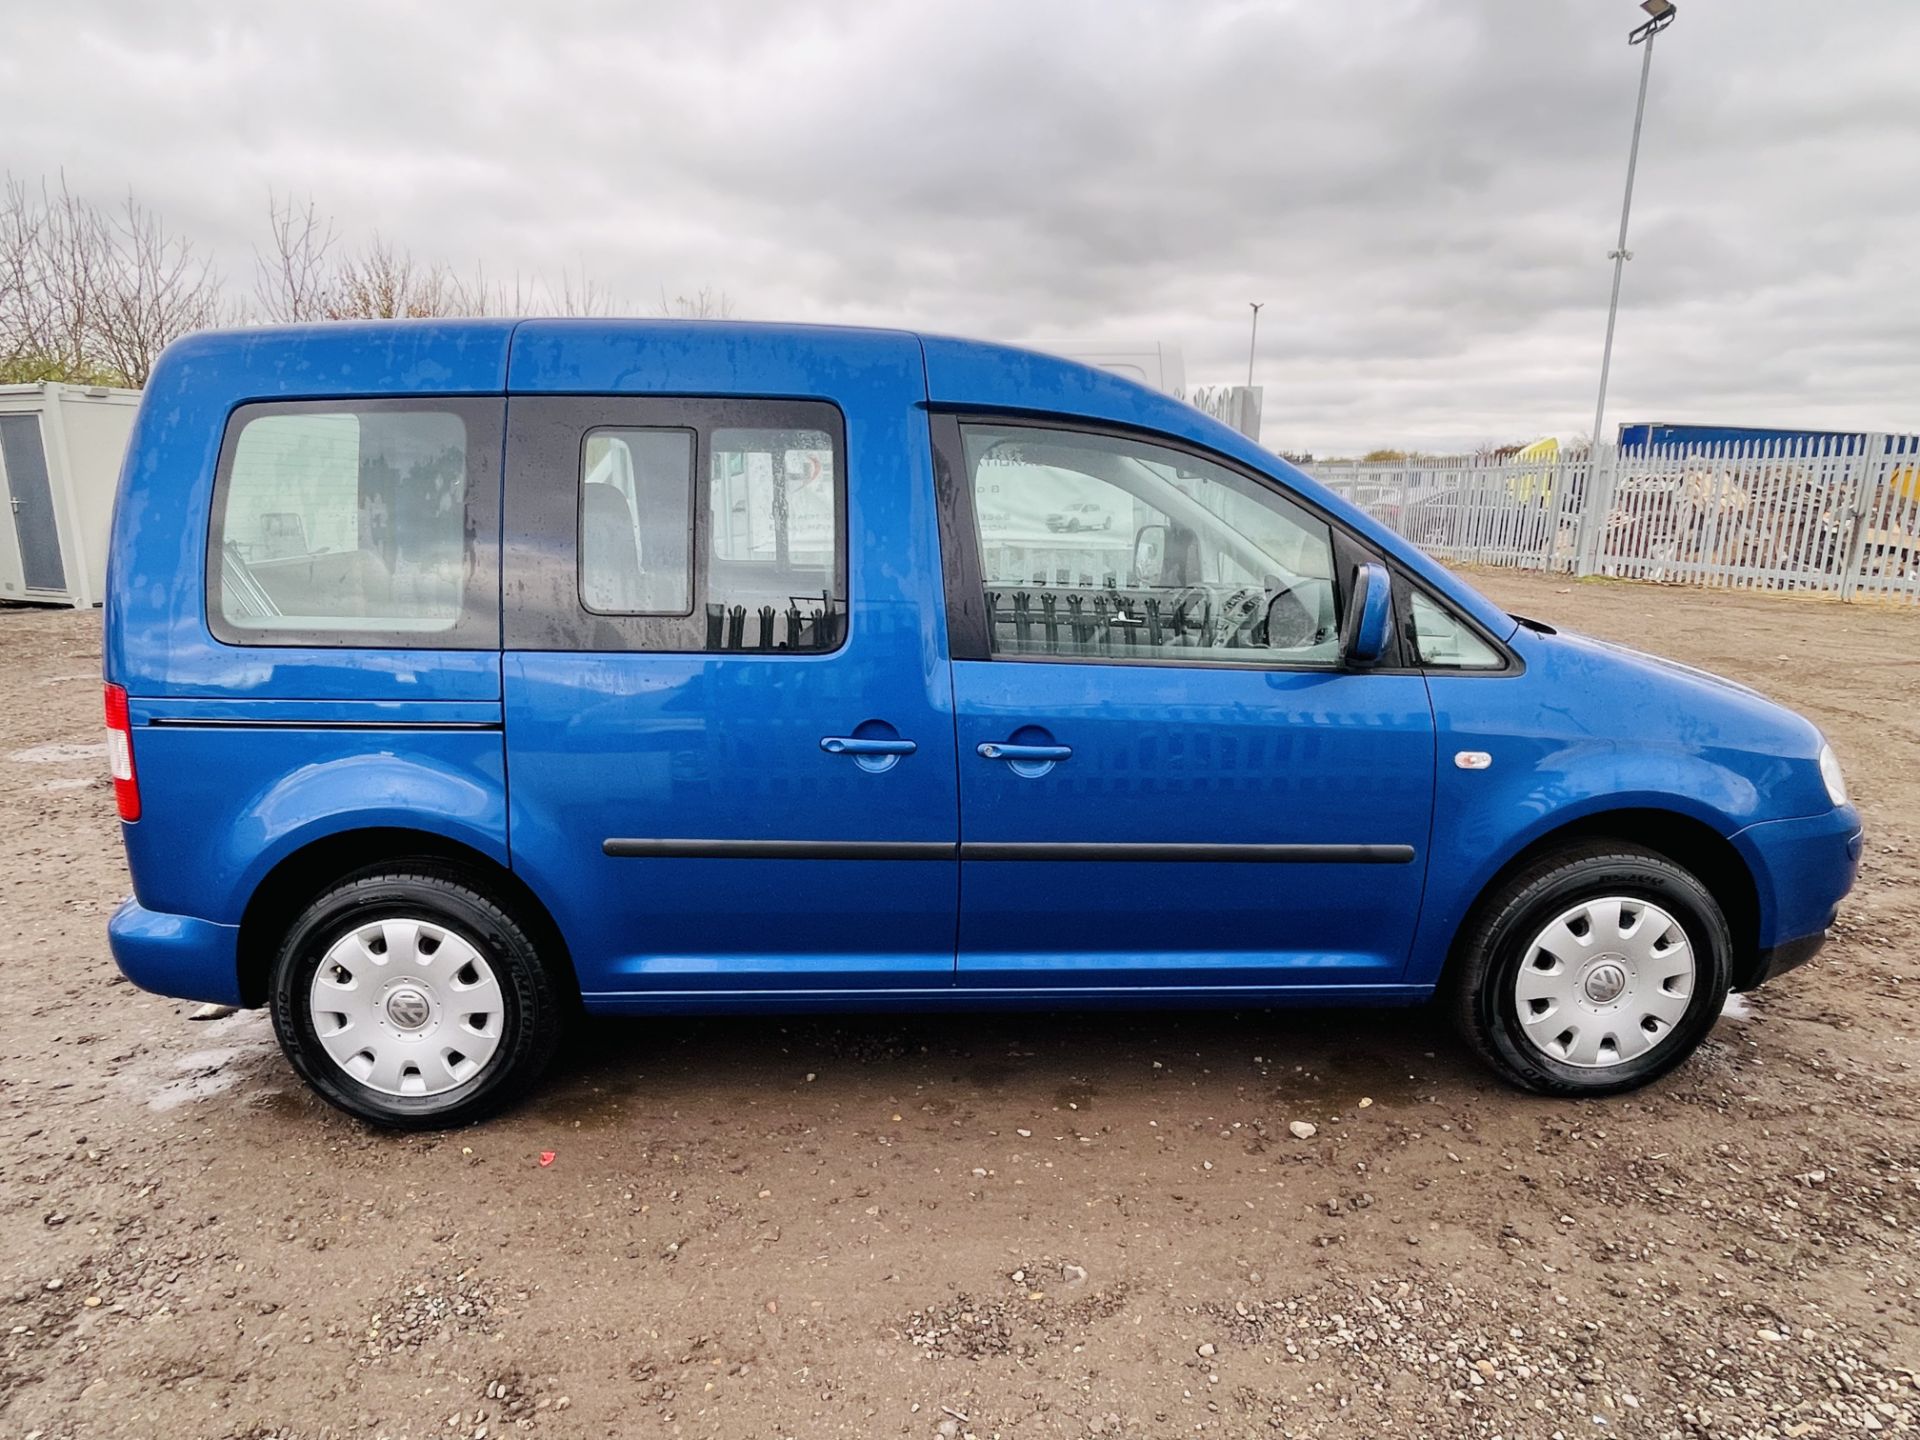 ** ON SALE ** Volkswagen Caddy Life 1.9 TDI DSG Auto 2008 '08 Reg'Air Con - Only Done 38k - - Image 18 of 24